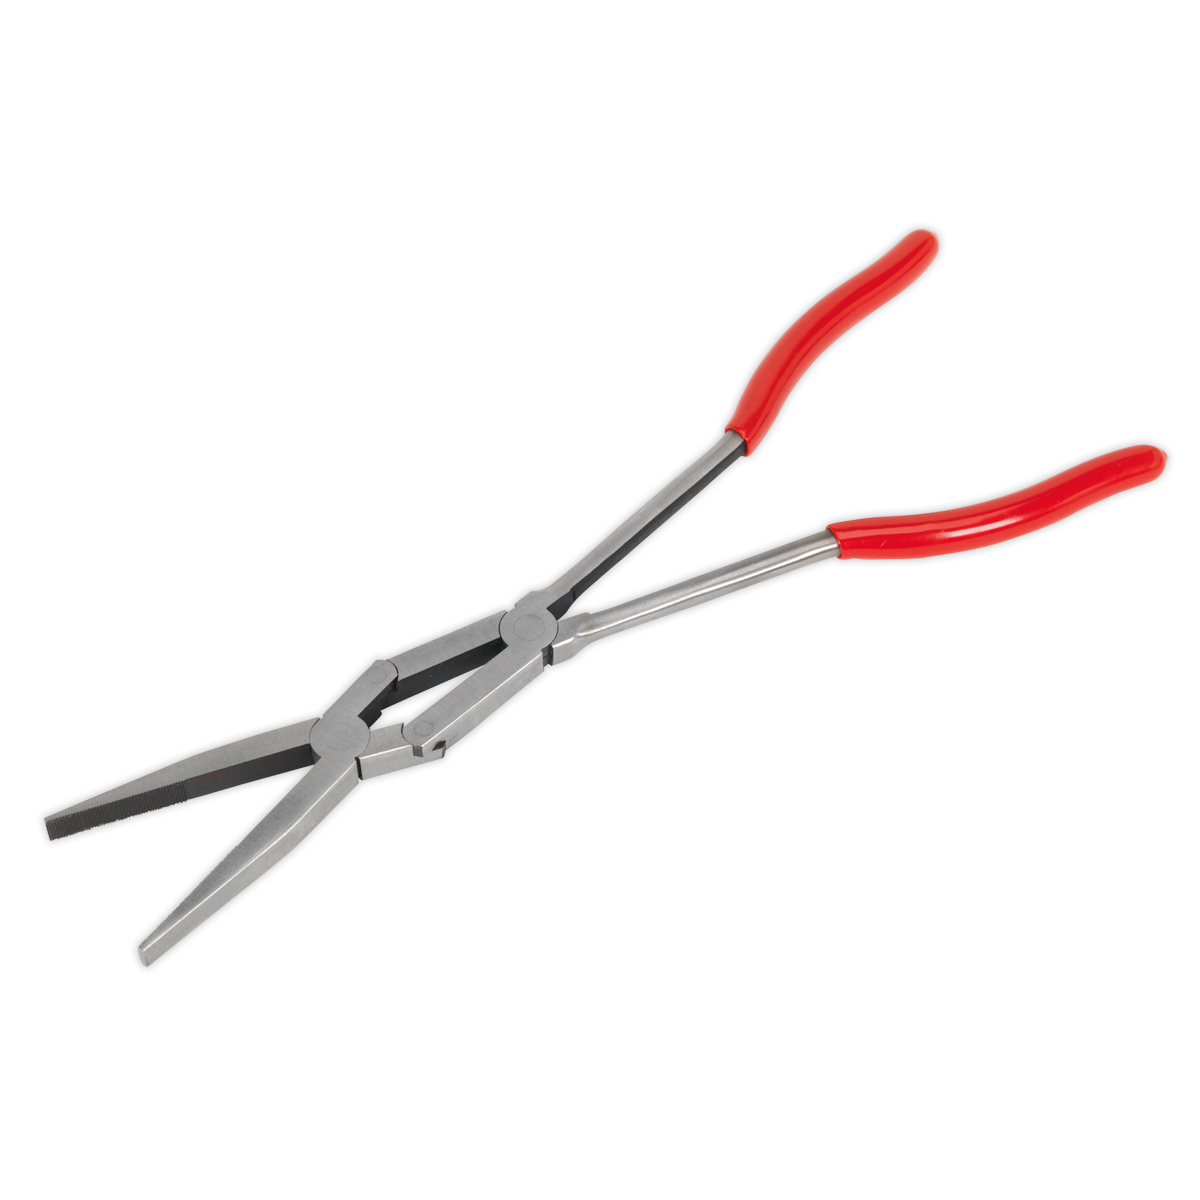 Sealey 335mm Double Joint Flat Nose Pliers AK8590